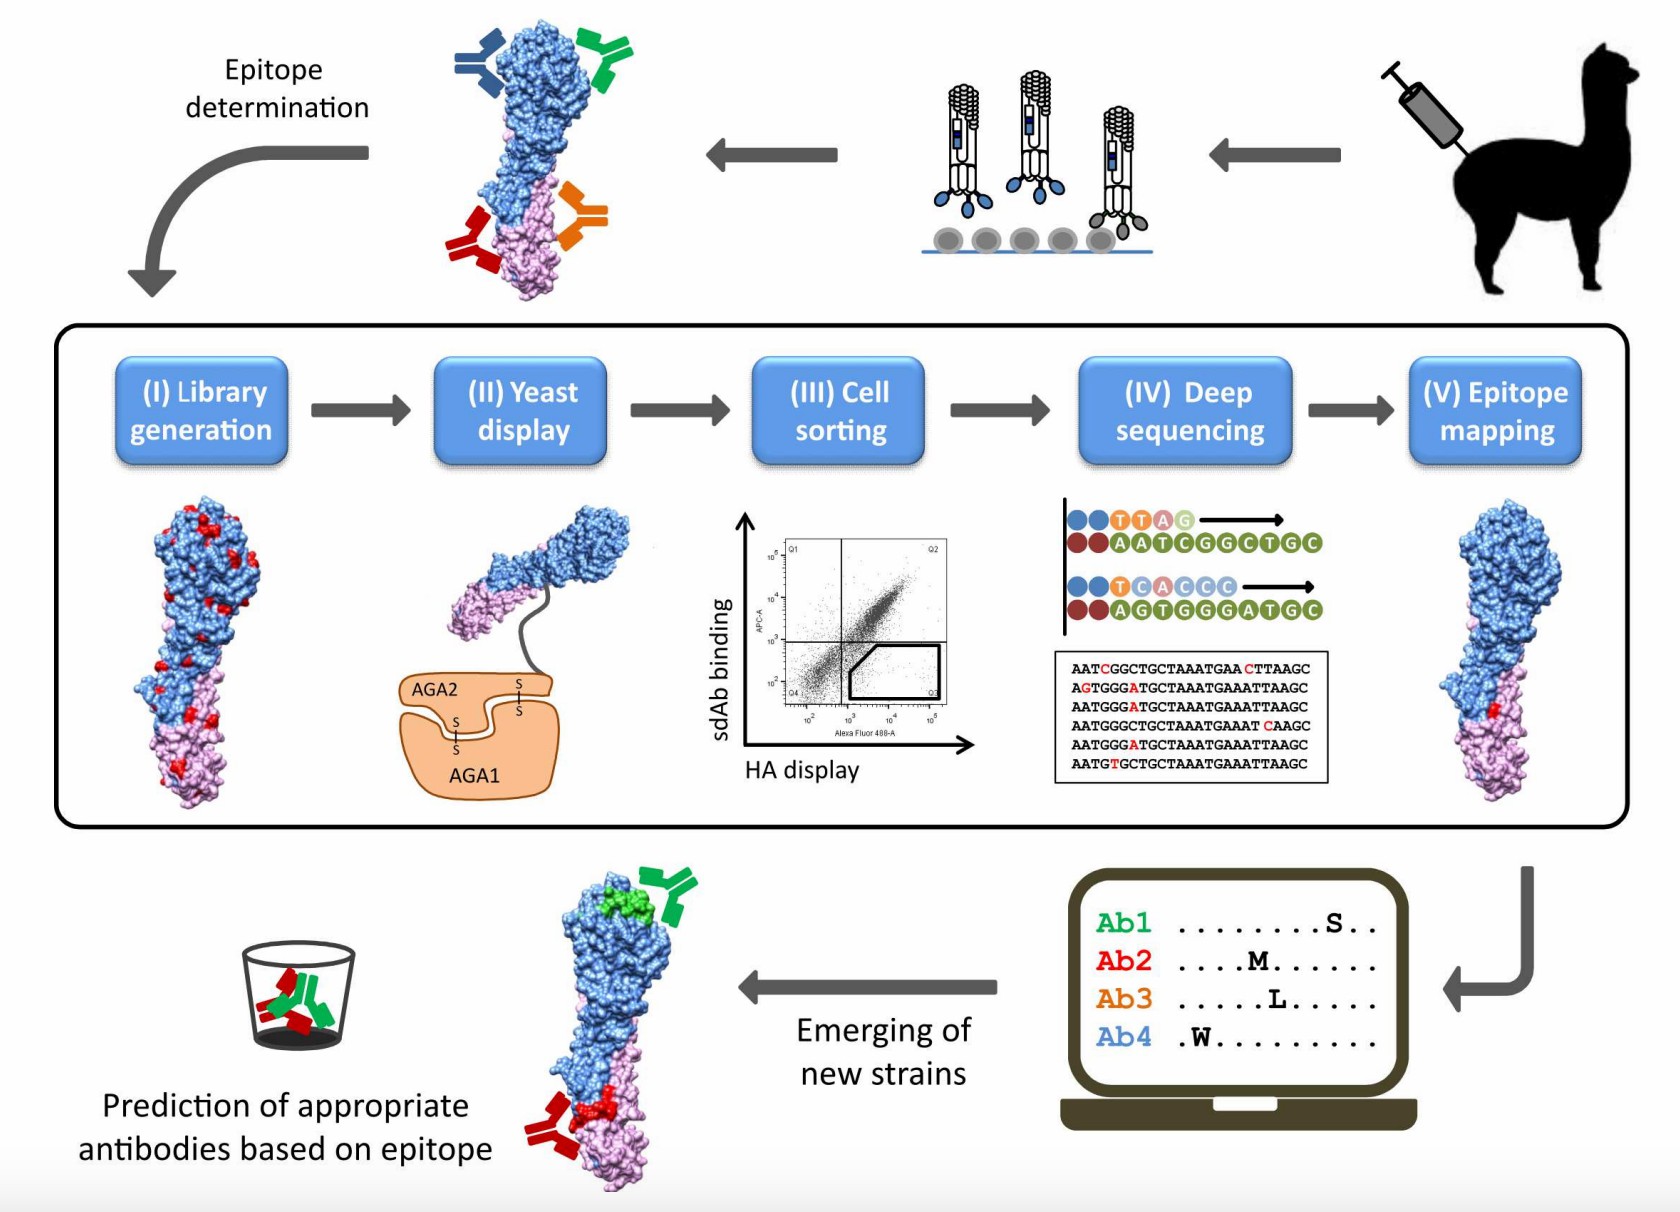 A general strategy for high-throughput epitope mapping of single domain antibodies to hemagglutinin using flow cytometry assay. (Gaiotto & Hufton, 2016)